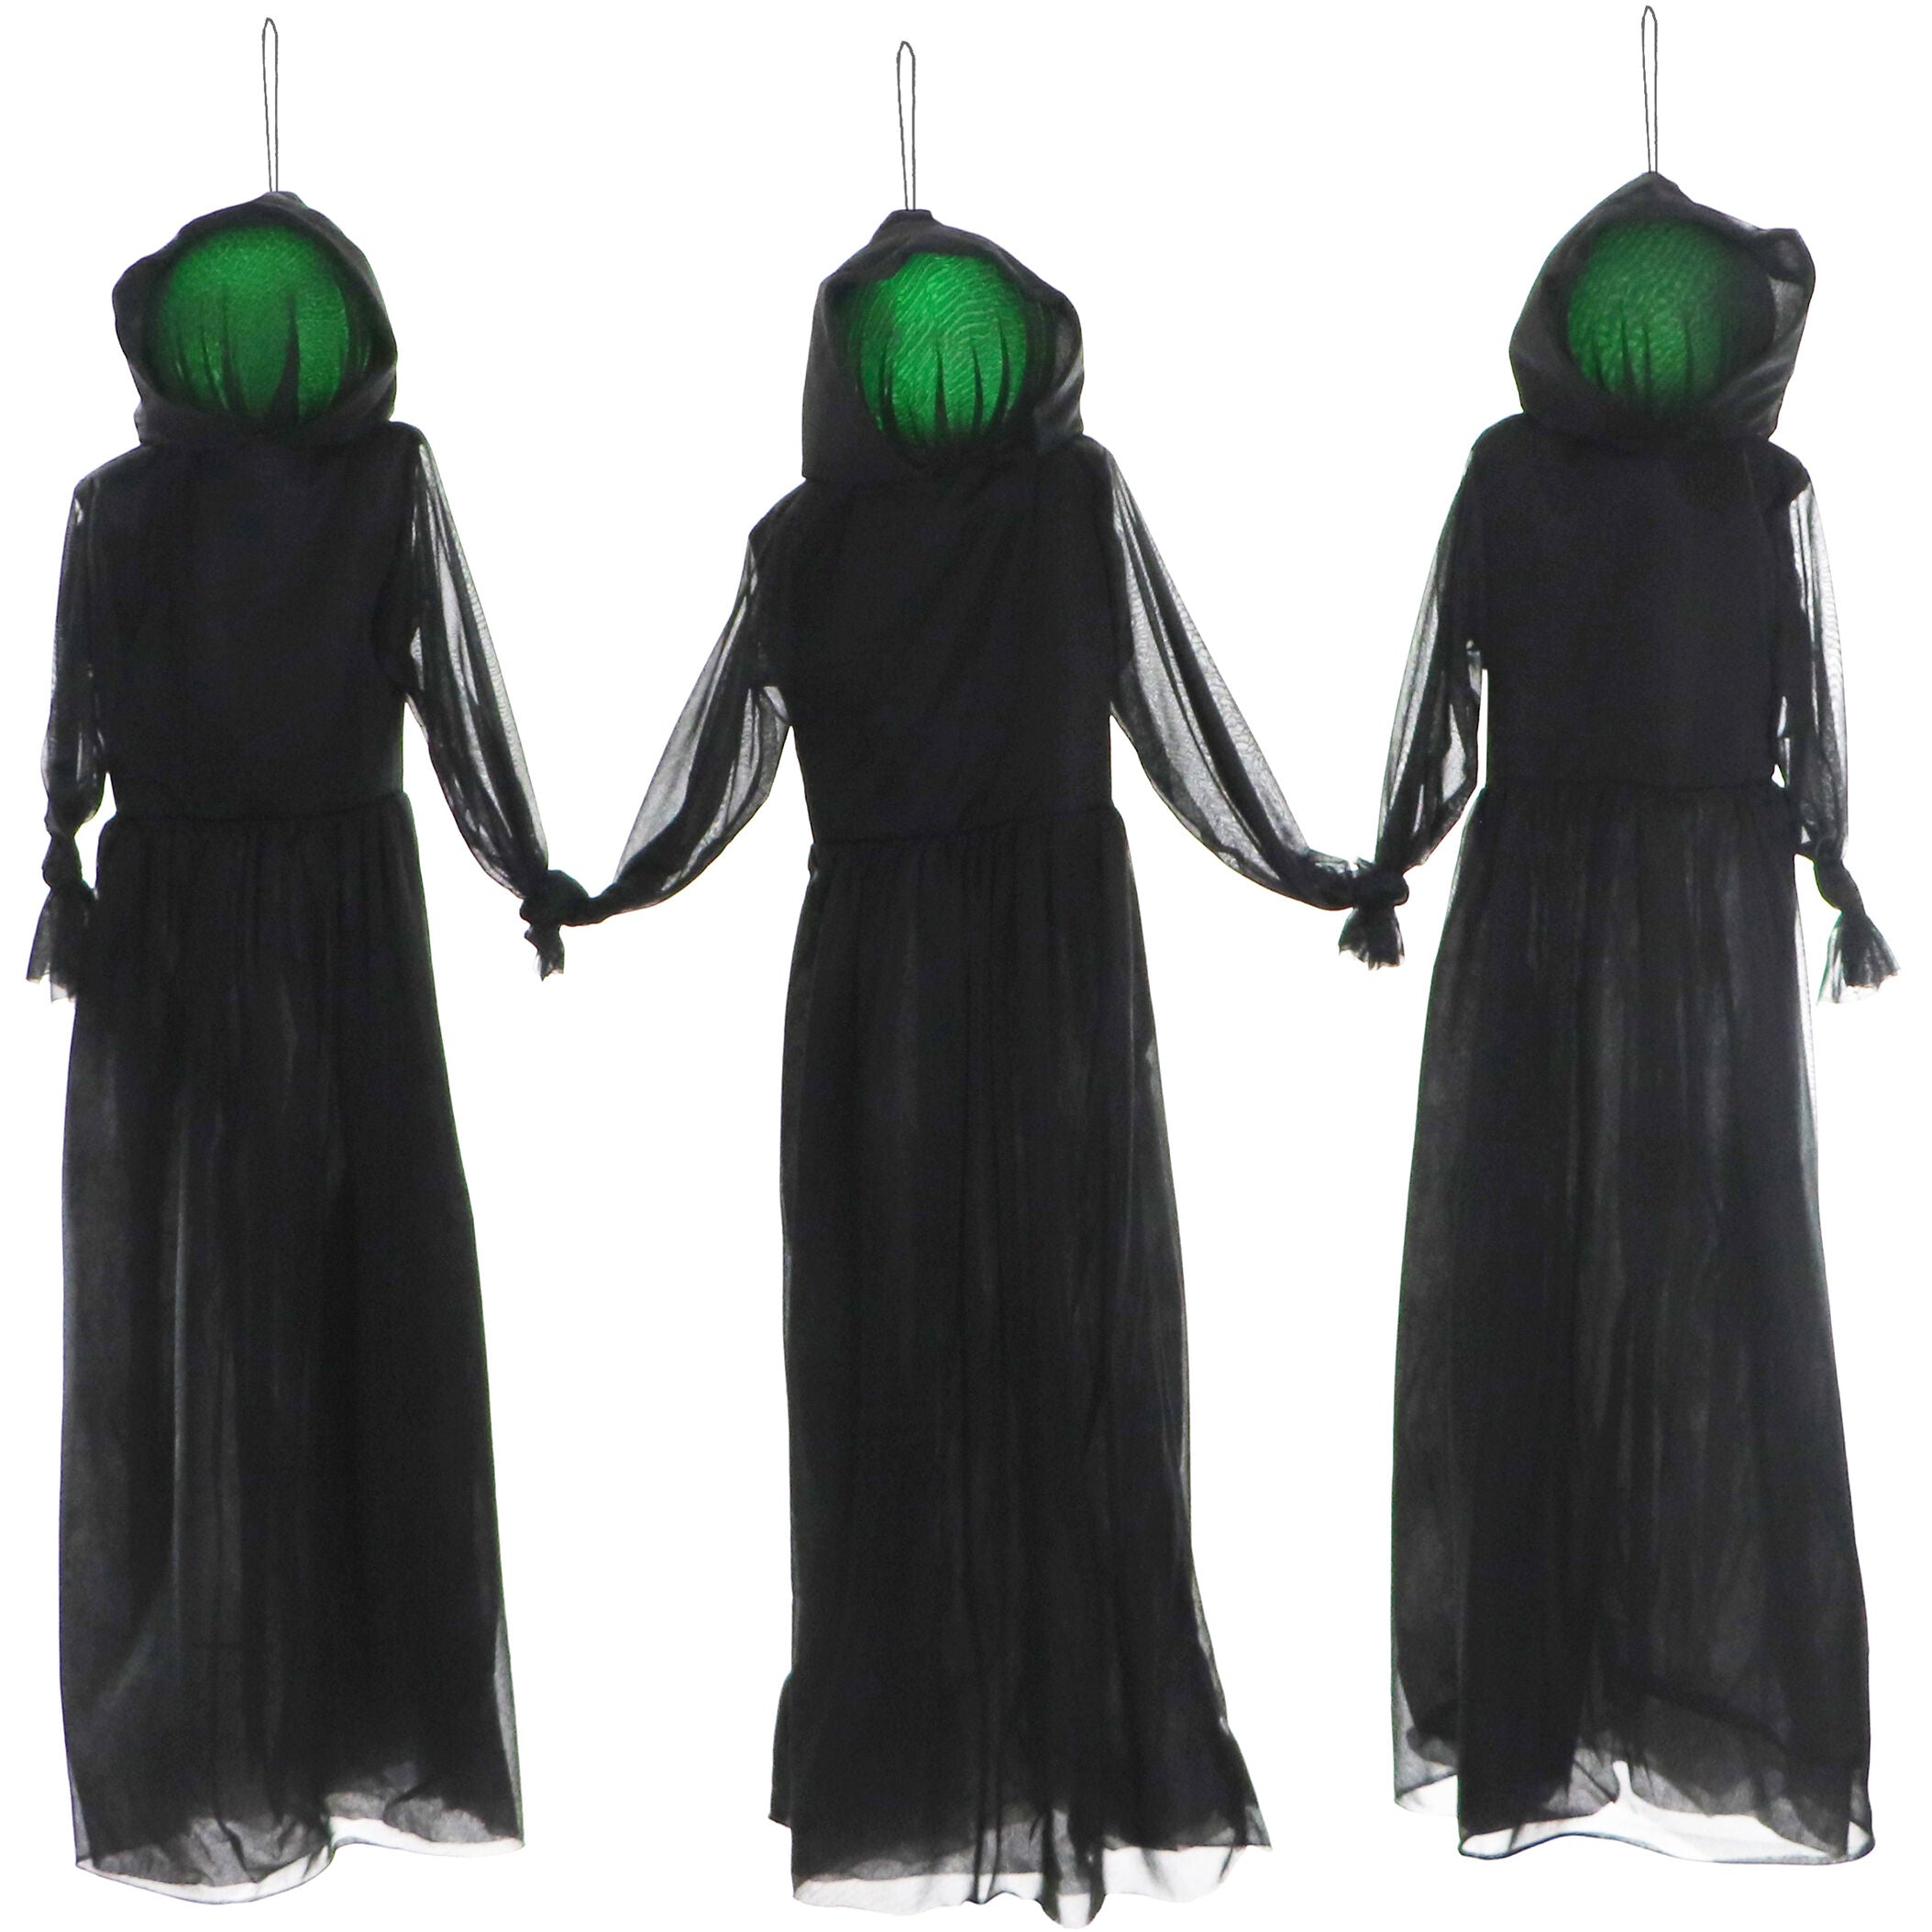 Haunted Hill Farm - Trio of Darkness with Glowing Heads and Removable Yard Stakes for Hanging Halloween Decoration